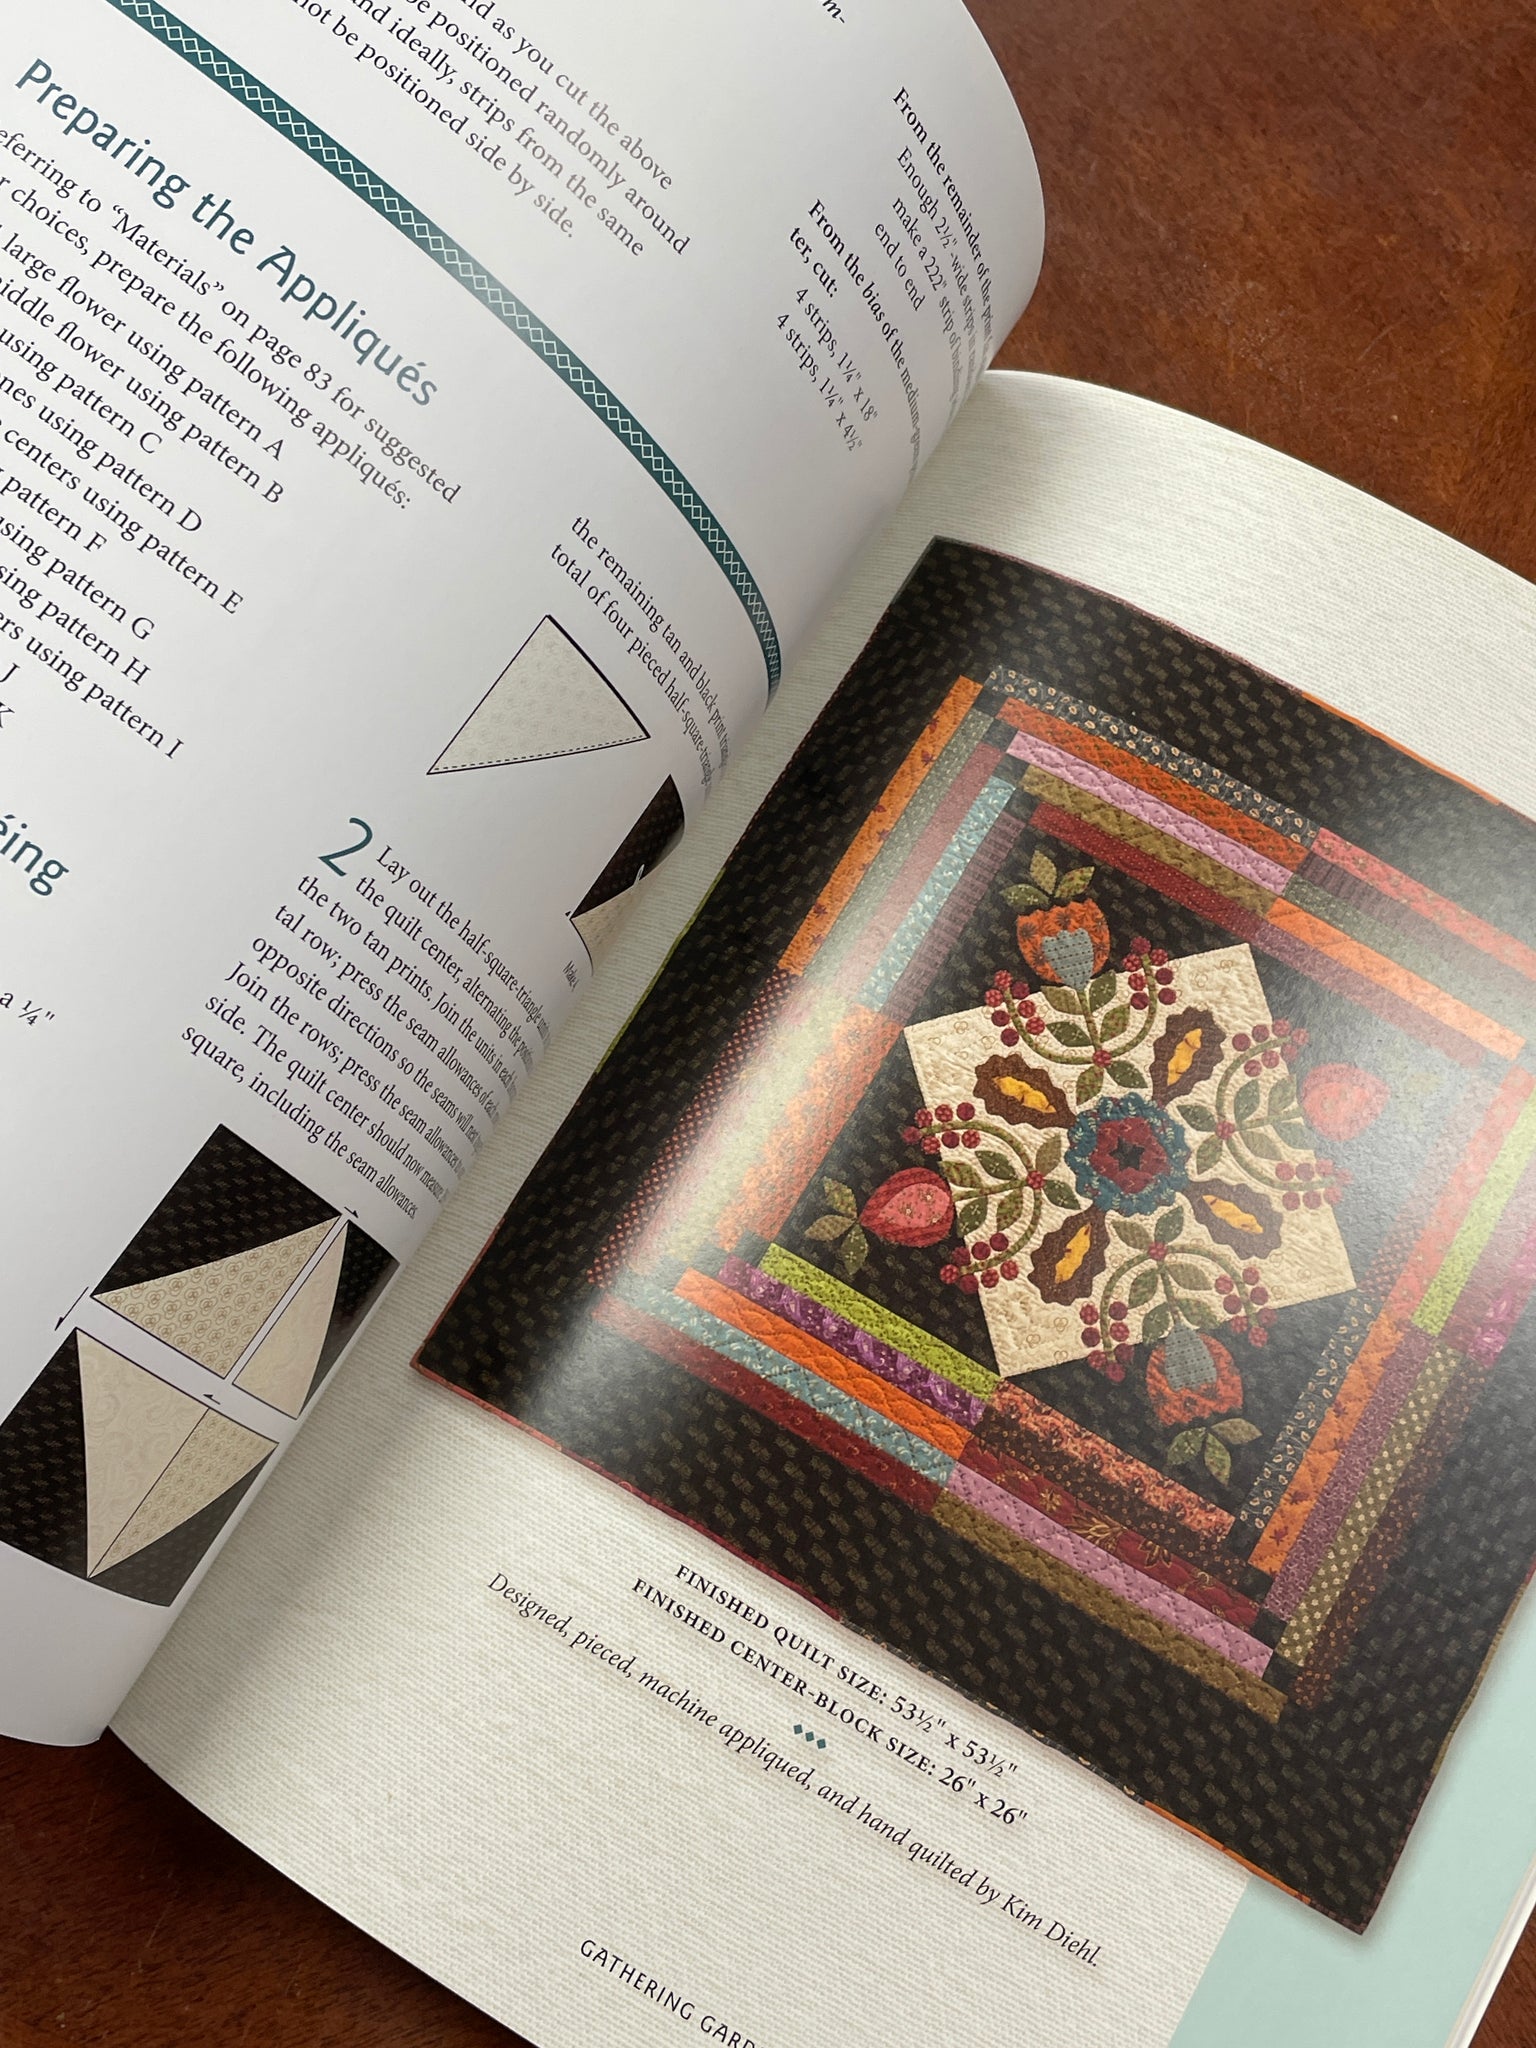 2012 Quilting Book - "Simple Charm"